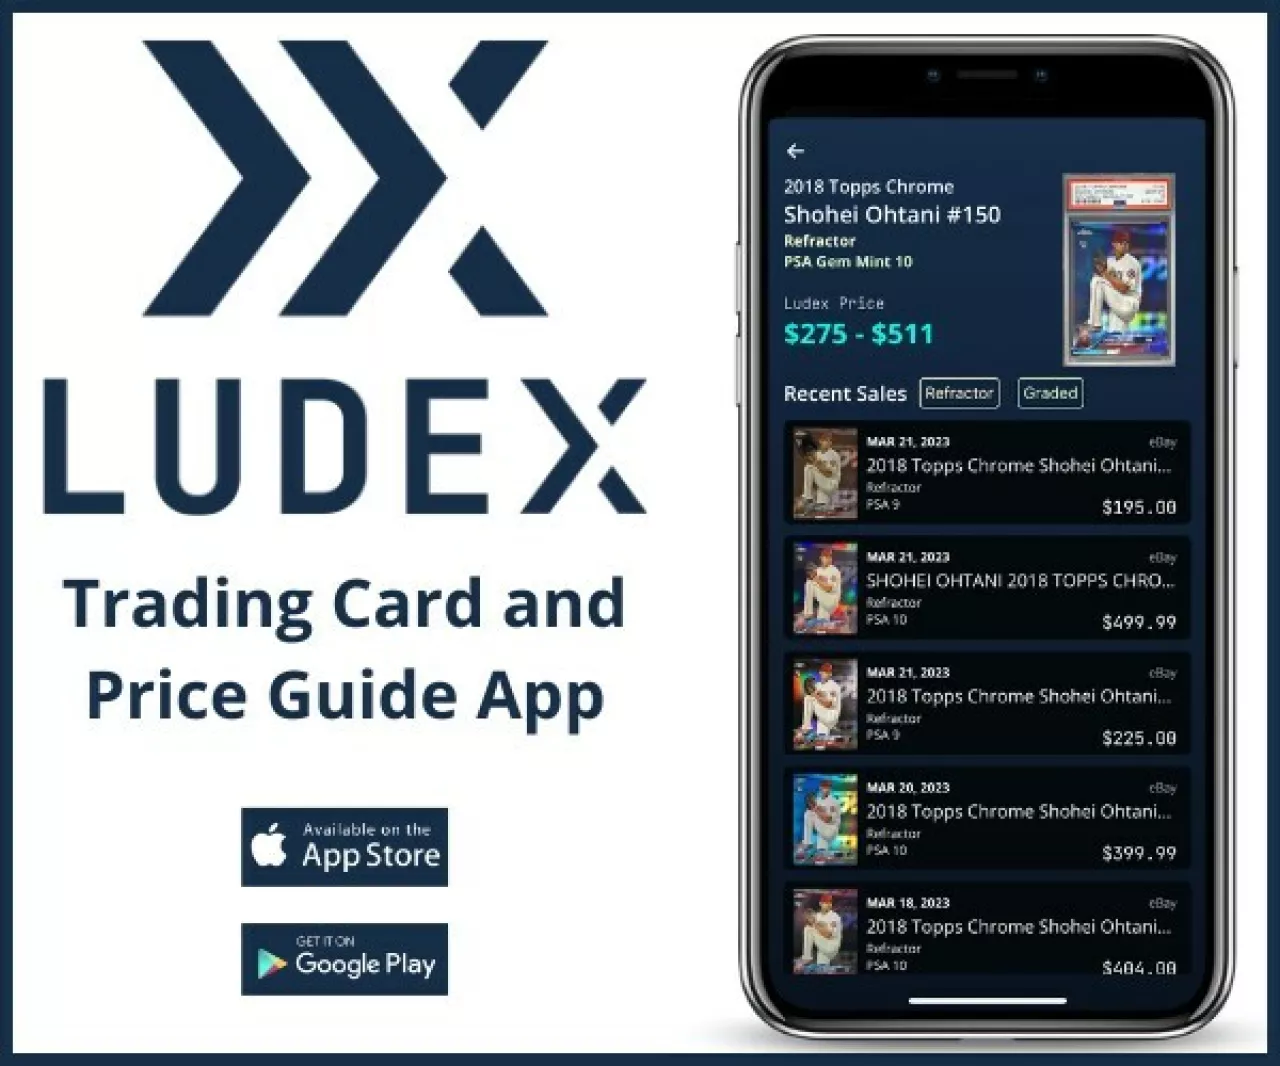 Trading Card Scanner and Price Guide App Ludex Raises $8M in Seed Round. Investors Include NFL Athletes, Brian Urlacher and Cassius Marsh